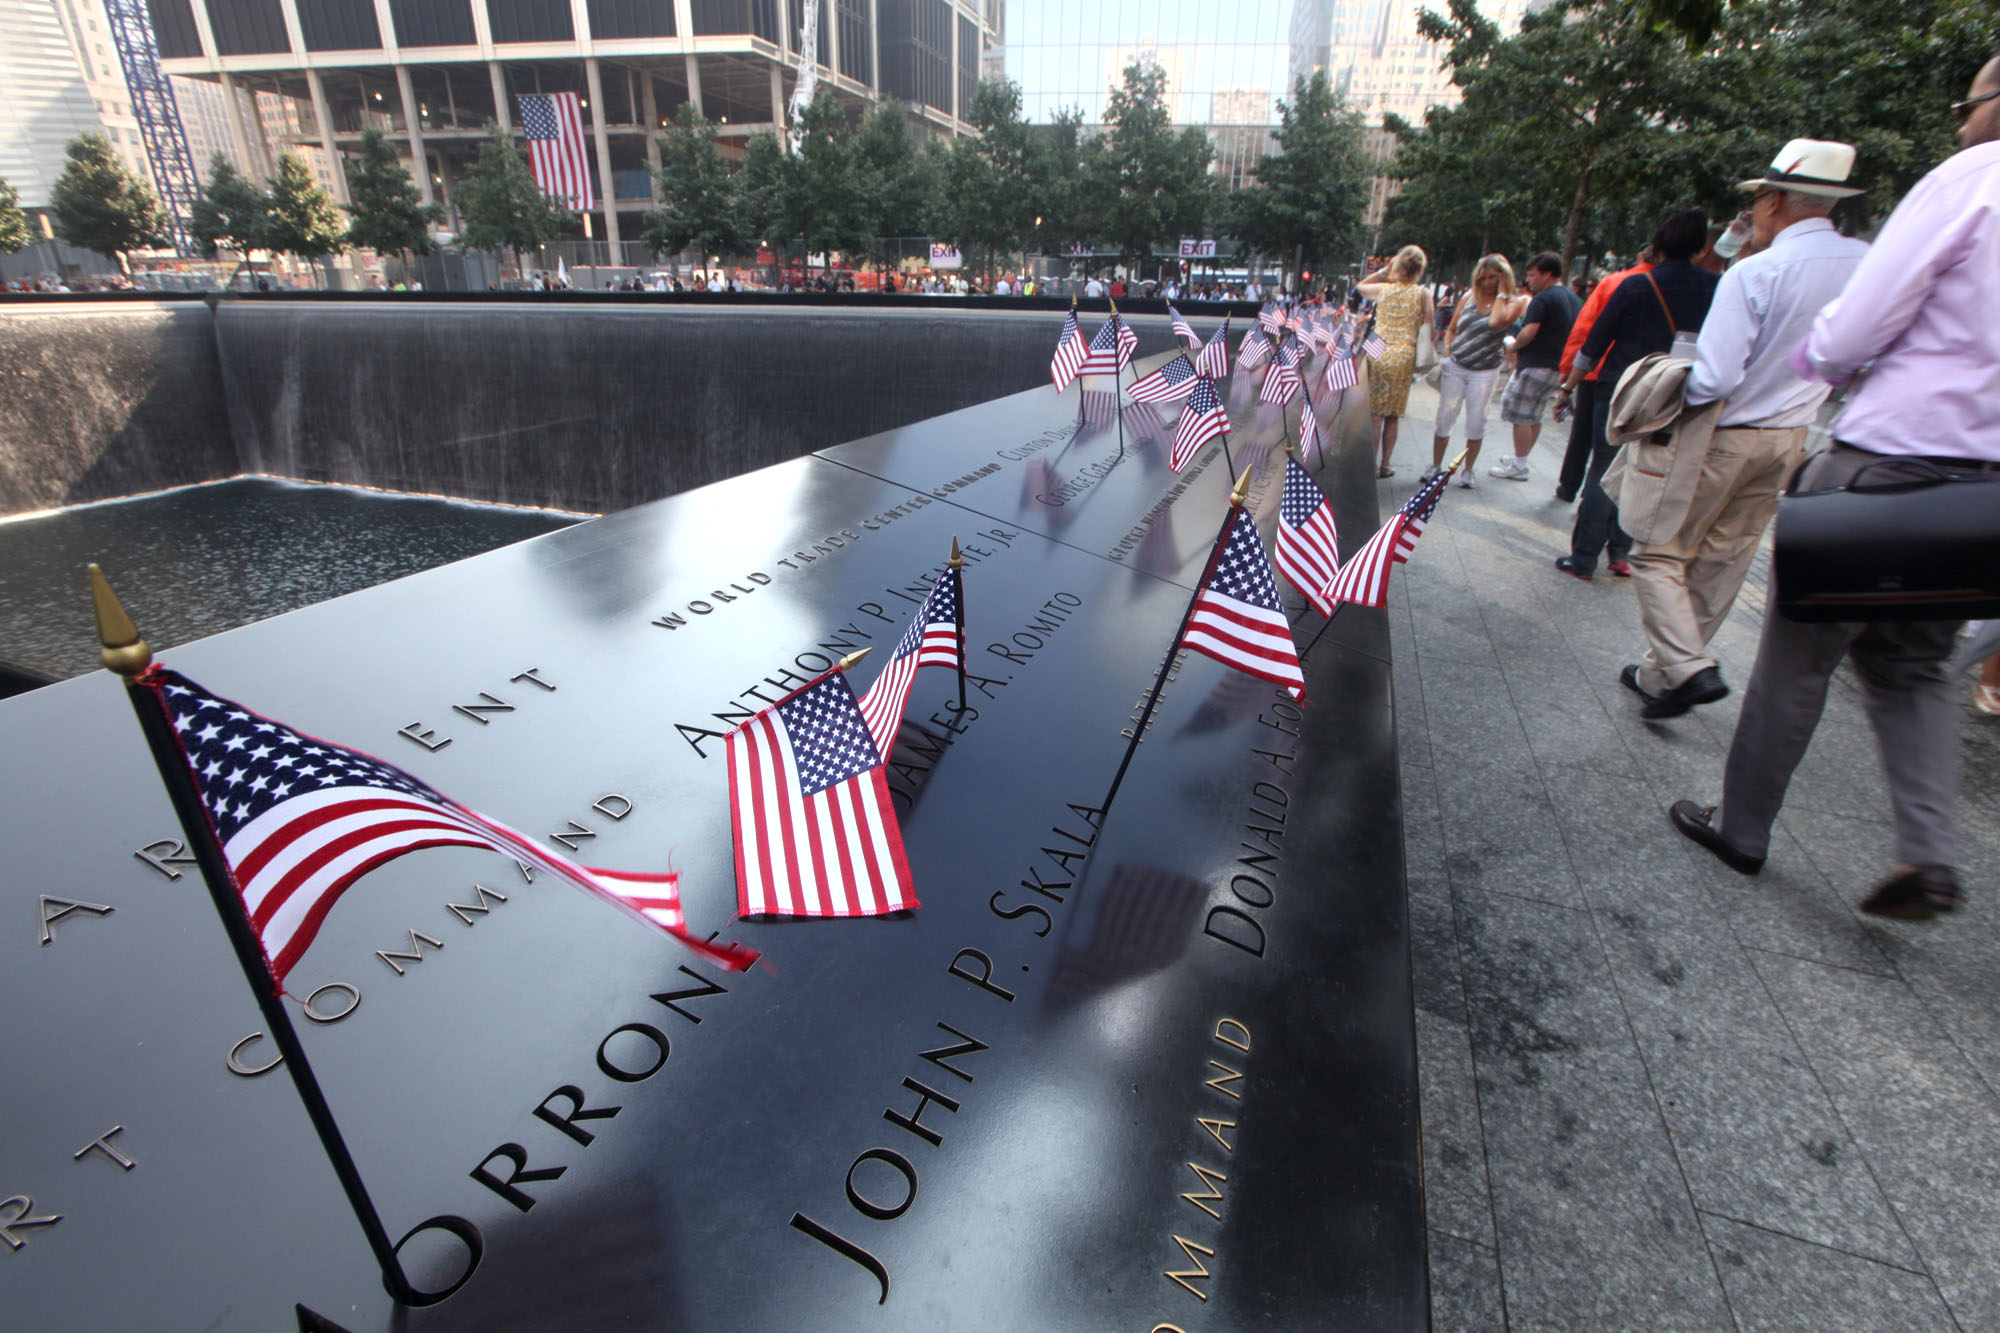 9/11 Archives: “Why 9/11 Still Matters”